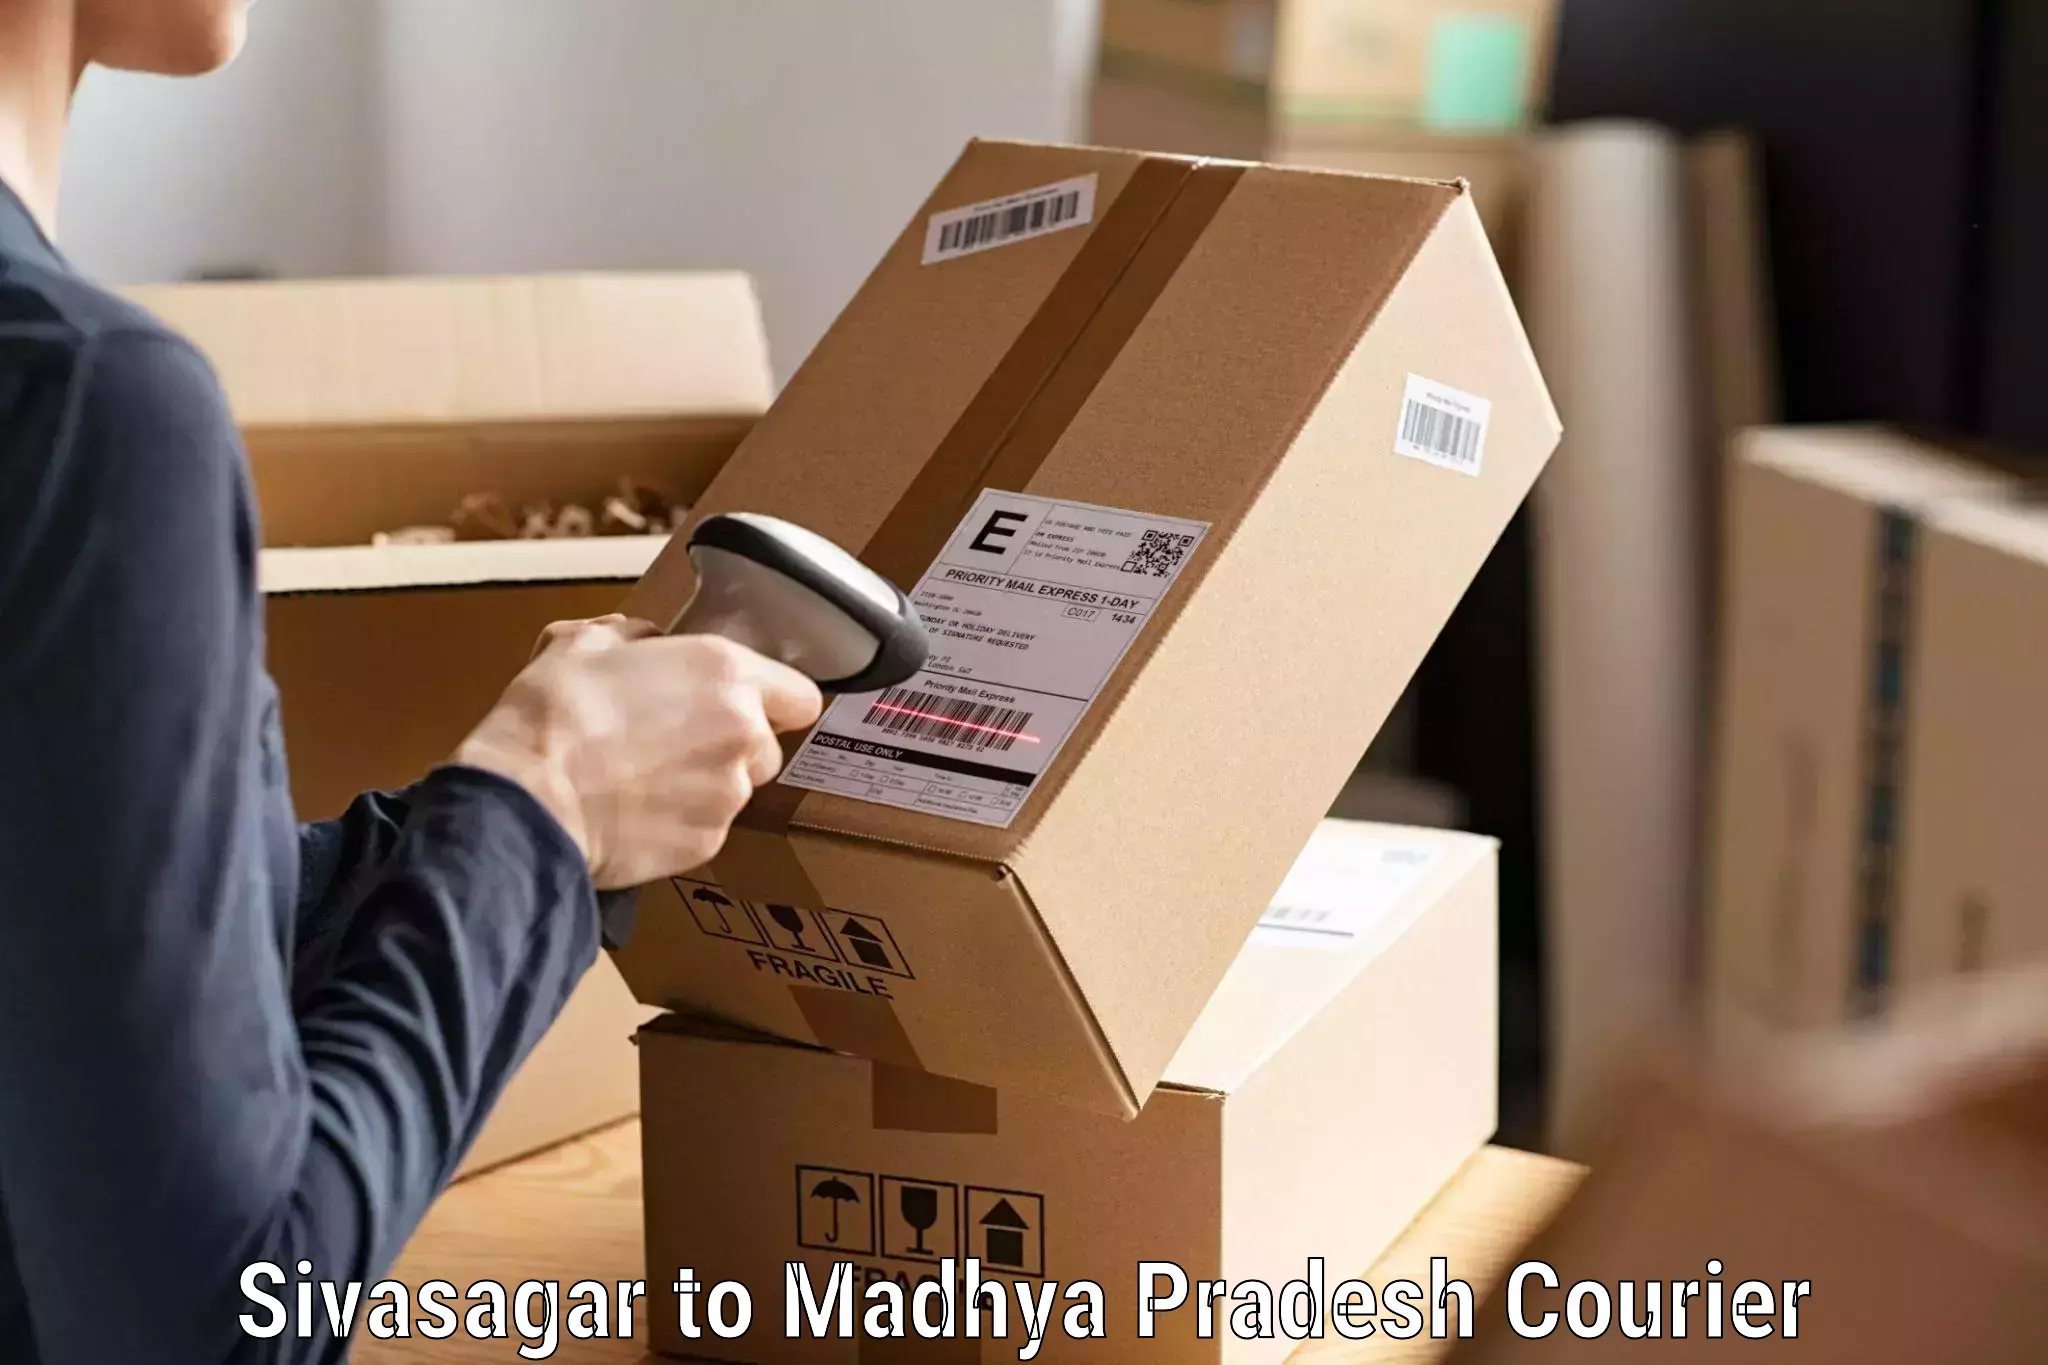 Dynamic parcel delivery in Sivasagar to Indore